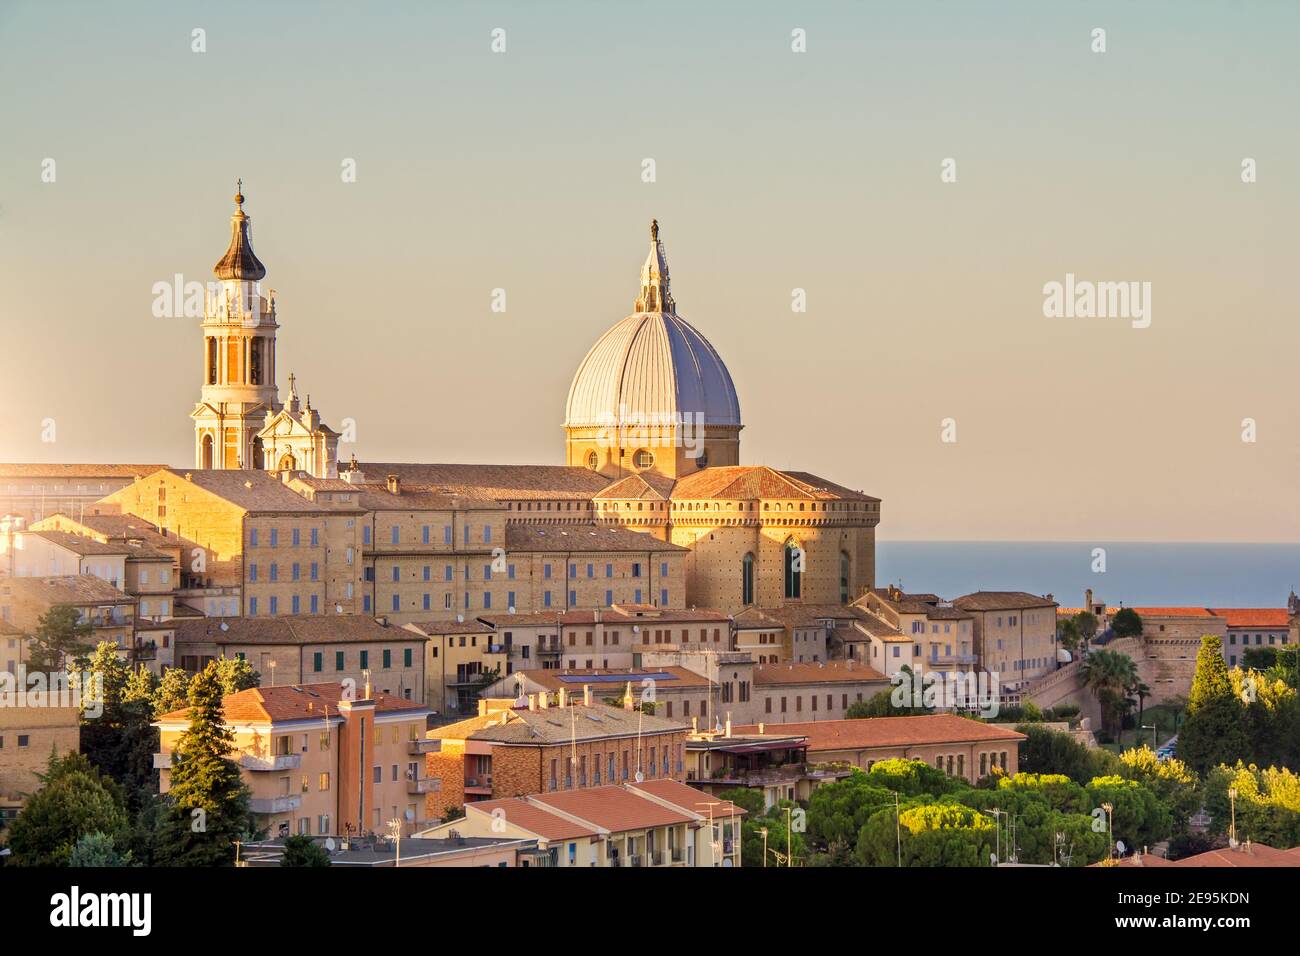 Loreto, Marche, province of Ancona. Panoramic view of the residence of the Basilica della Santa Casa, a popular pilgrimage site for Catholics at Stock Photo